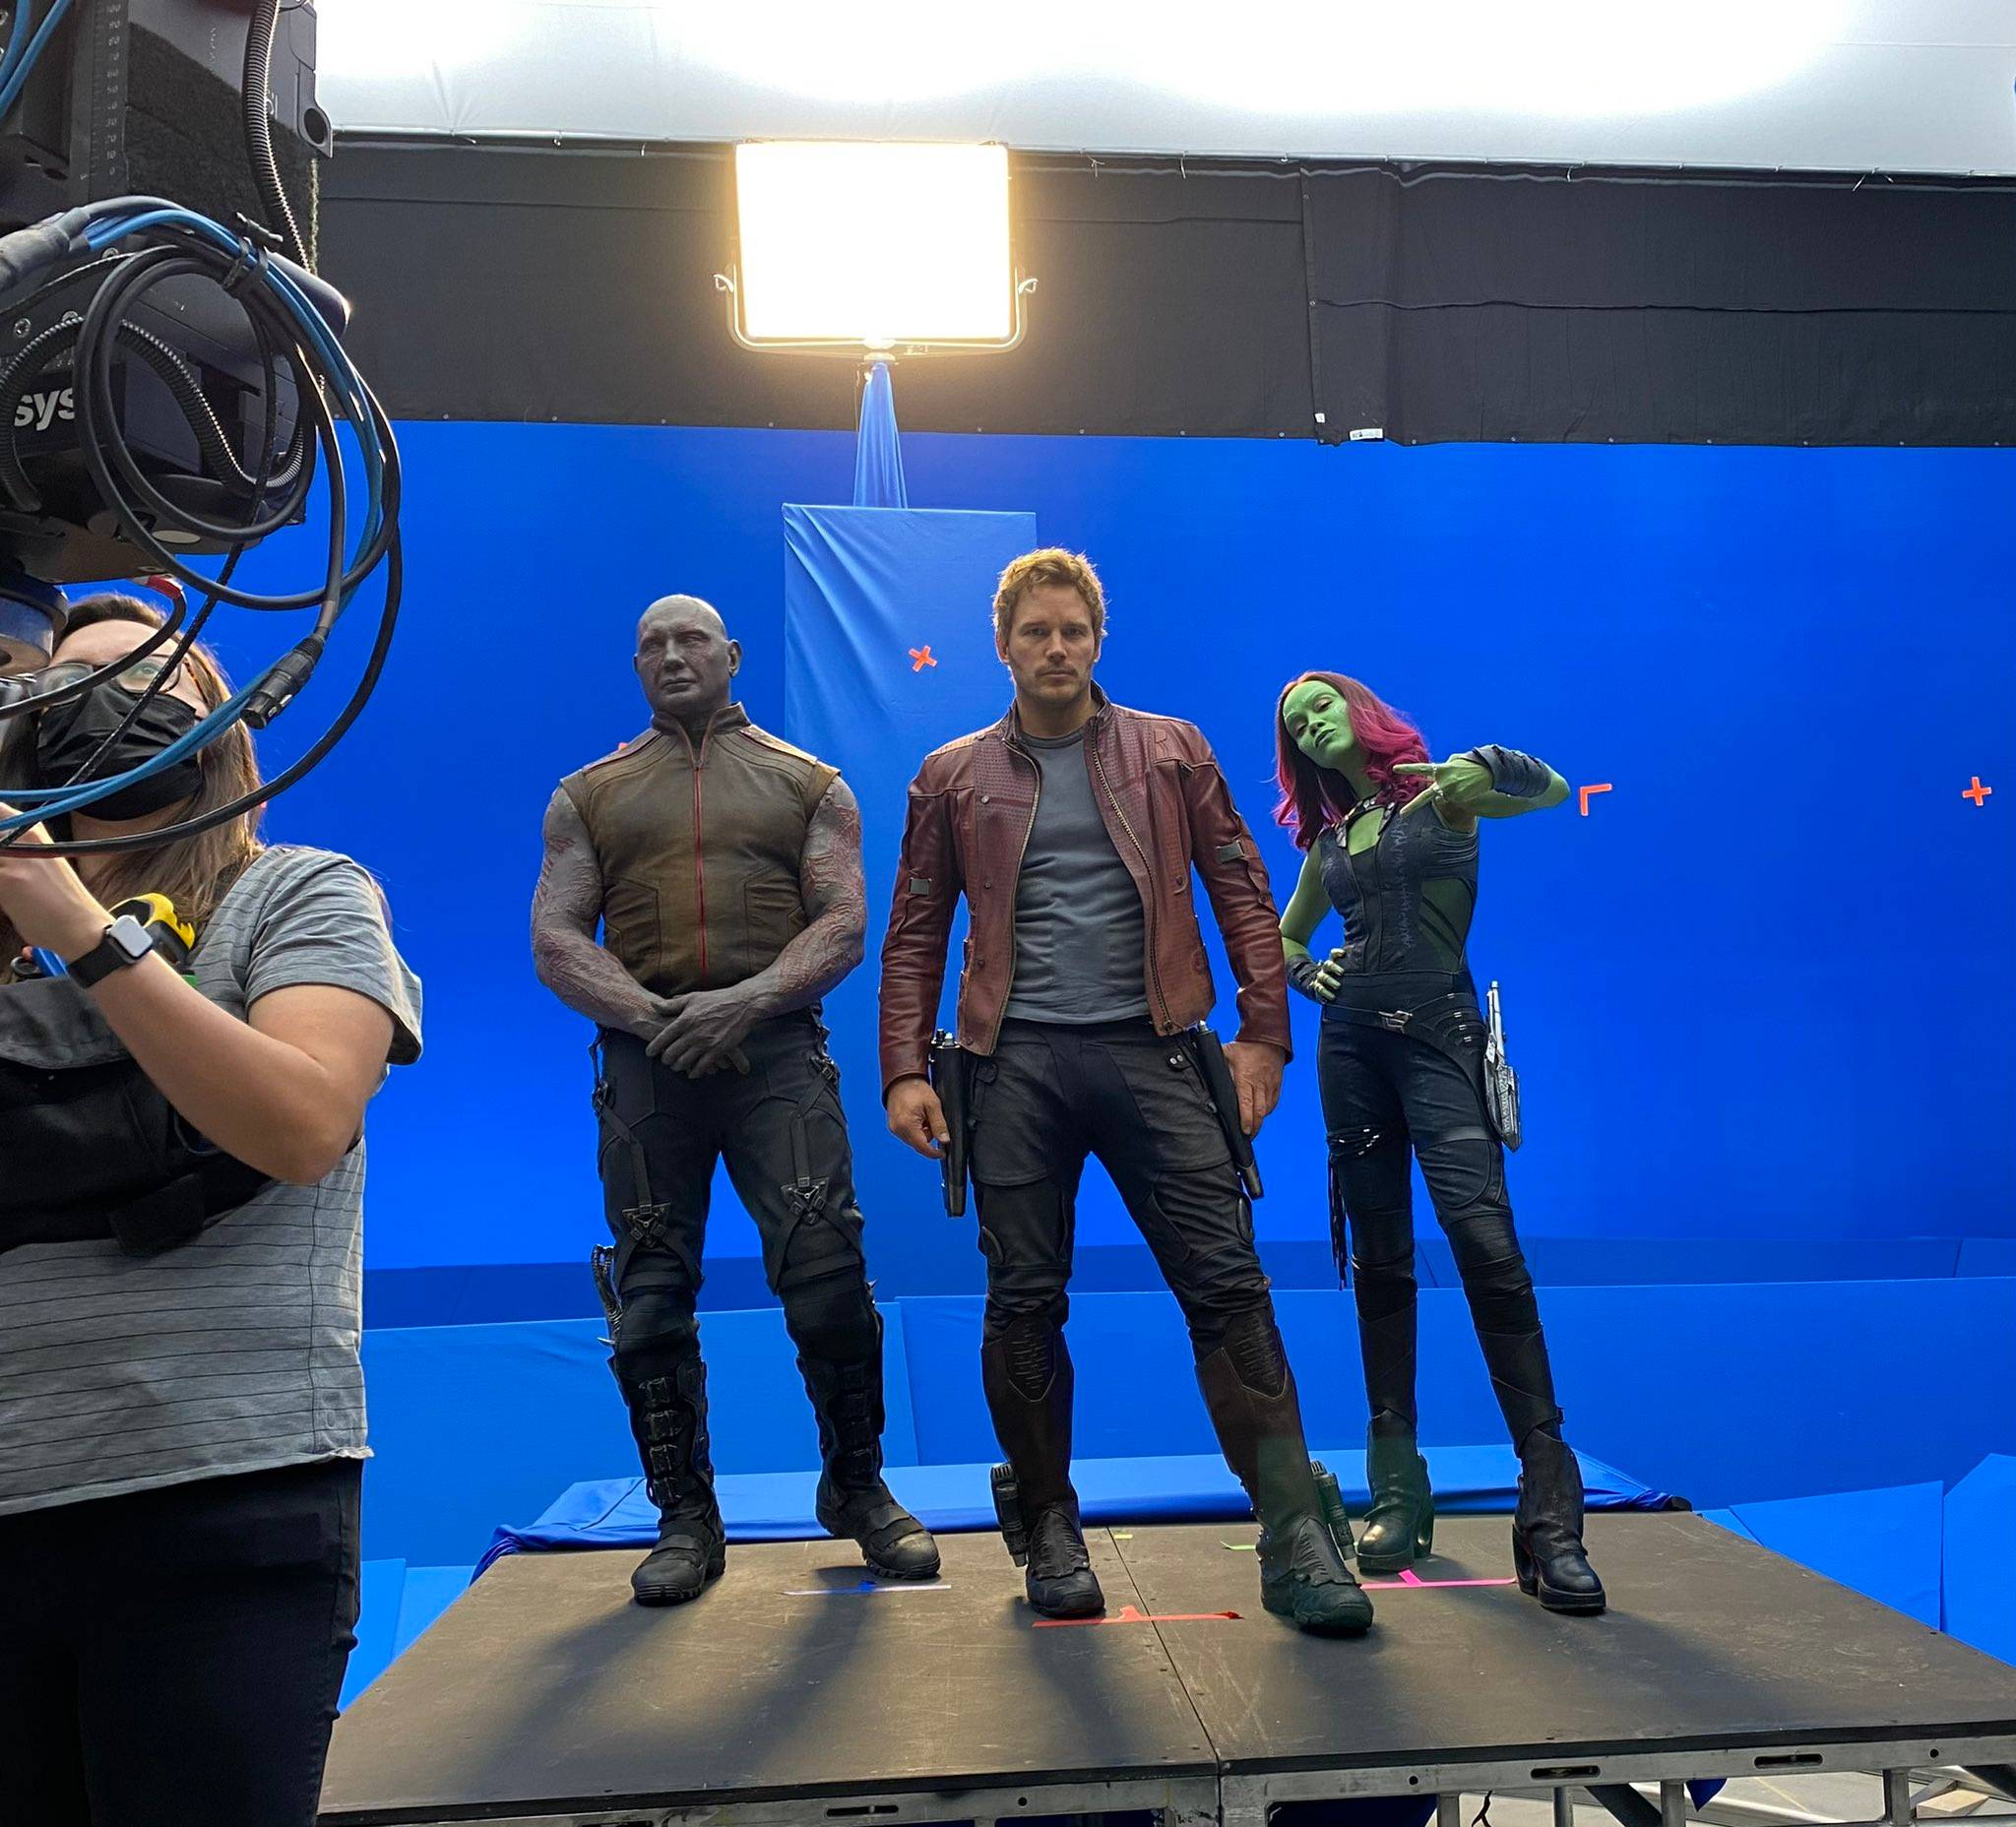 Director James Gunn shares behind-the-scenes photos shooting scenes for EPCOT's 'Guardians of the Galaxy Cosmic Rewind'